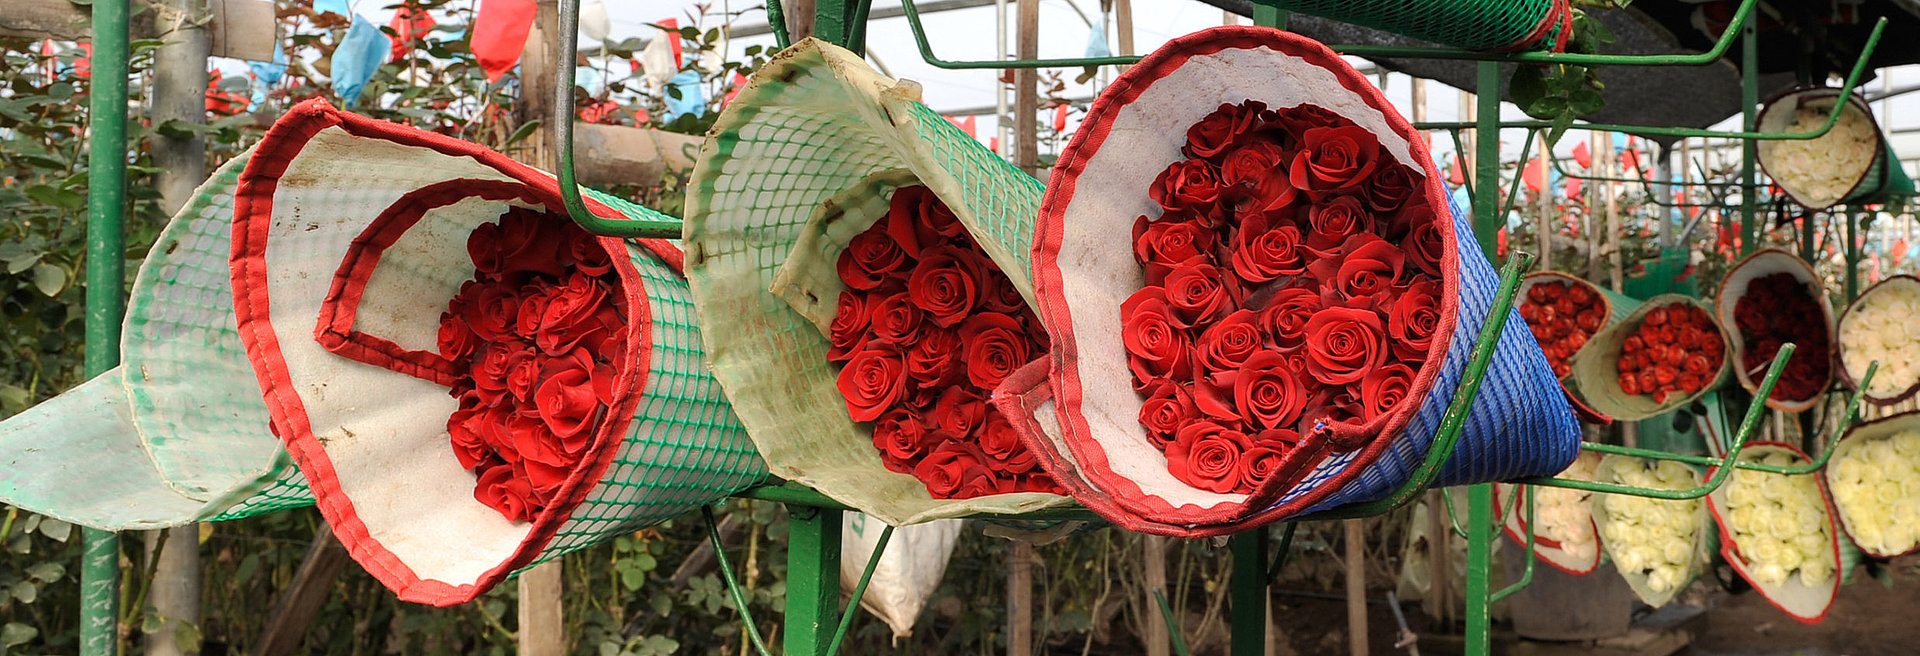 Several bouquets of red roses stored next to each other